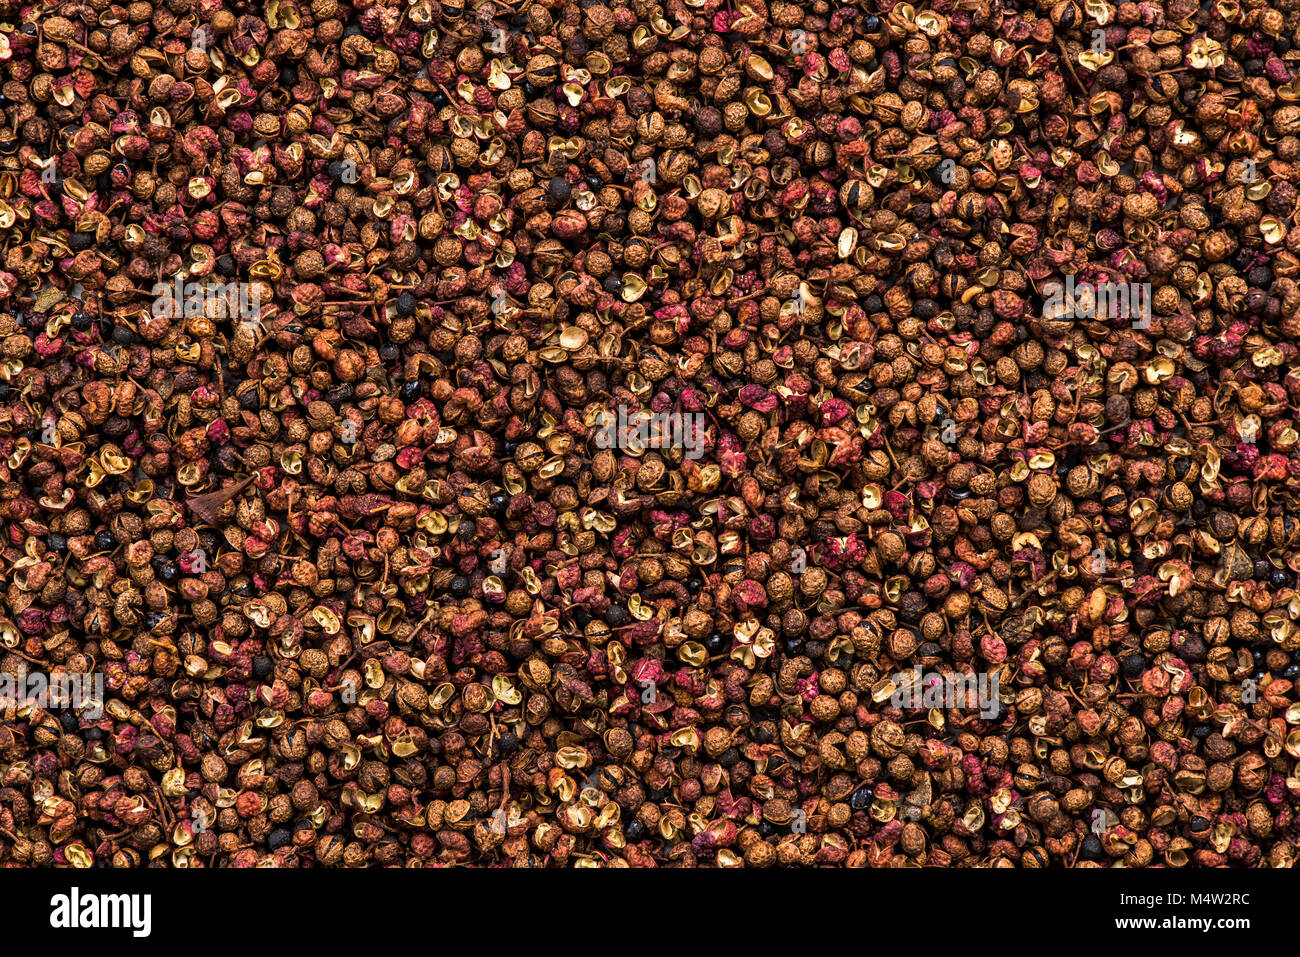 Sichuan pepper or Chinese coriander full frame background. Stock Photo